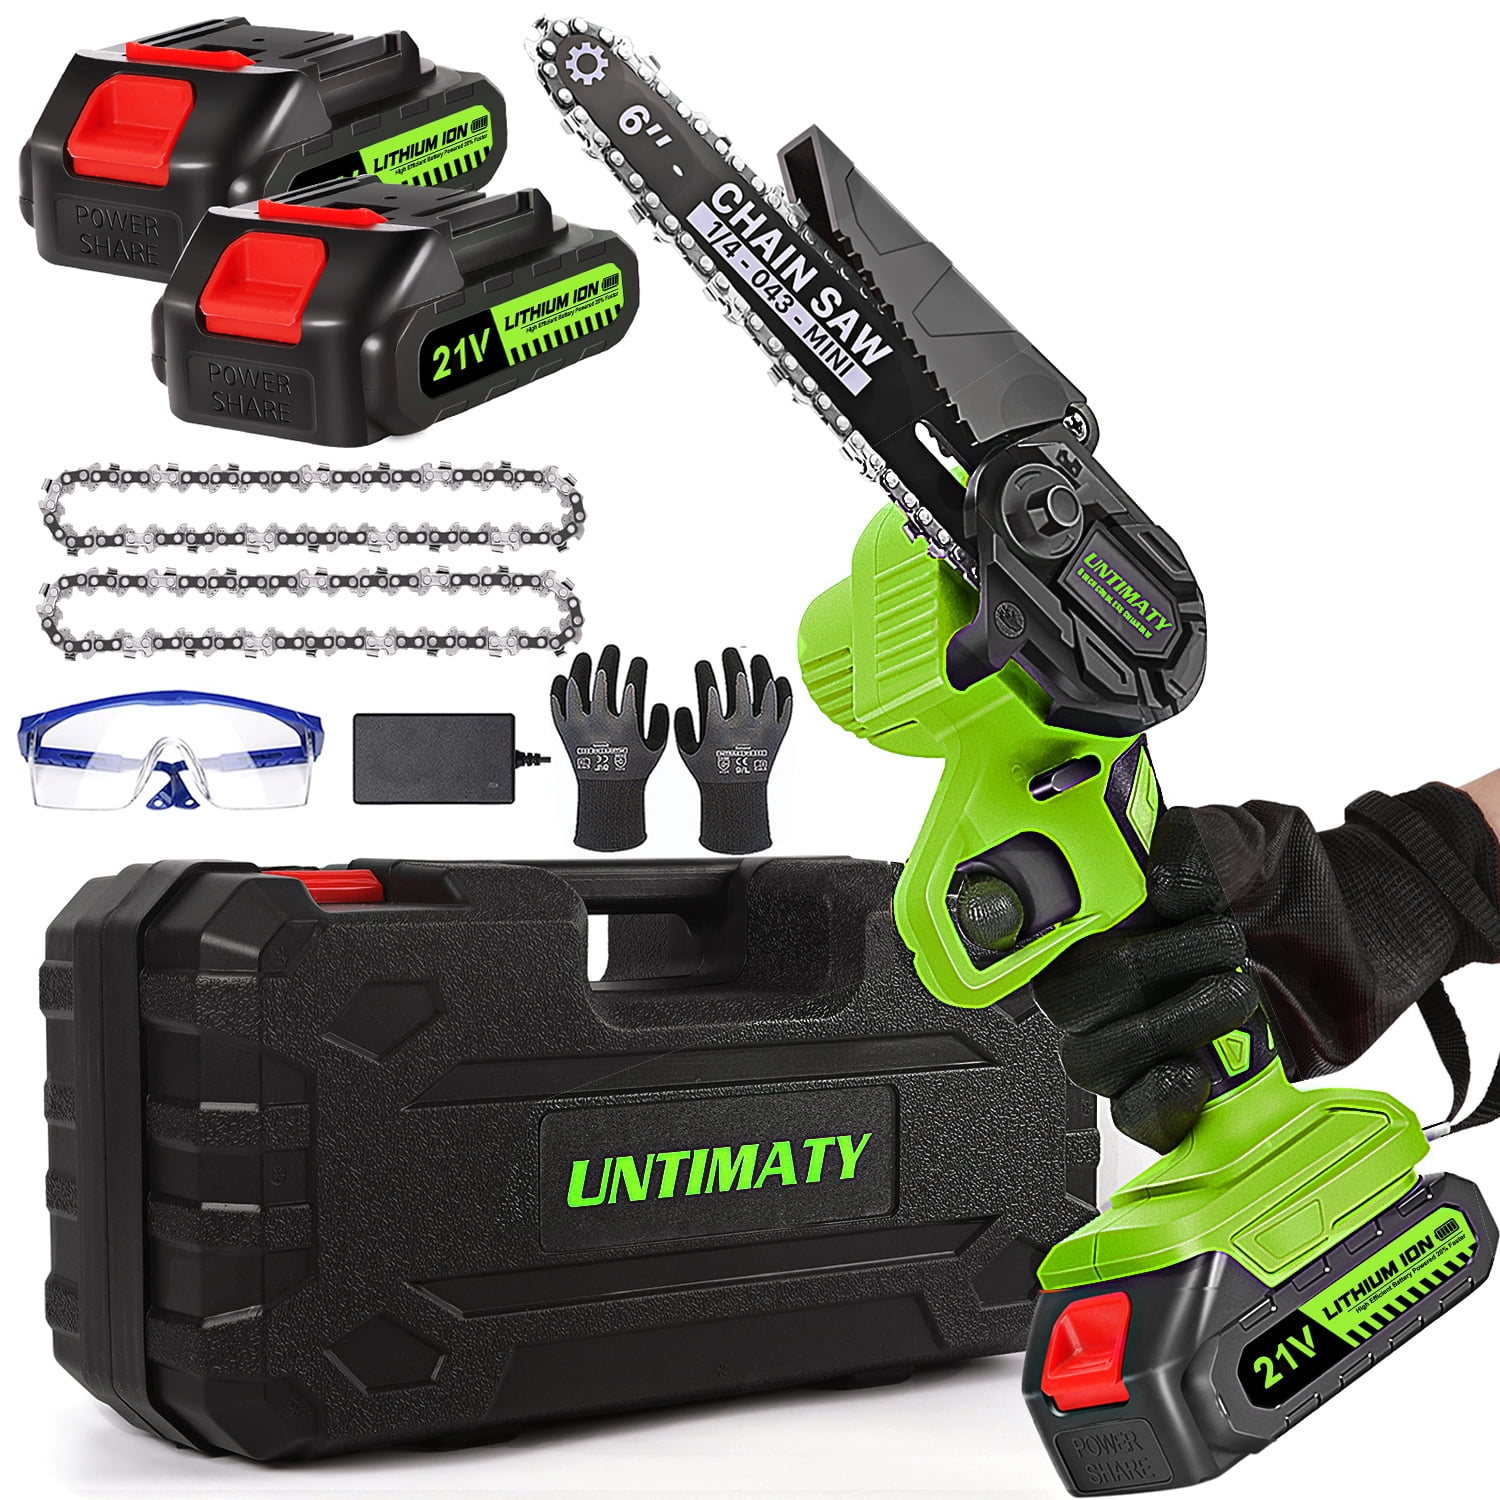 UNTIMATY 6" Cordless Mini Chainsaw, 6-inch Electric Portable One-Hand Chain Saw Wood Cutter, 2 Batteries 2 Chains, Green